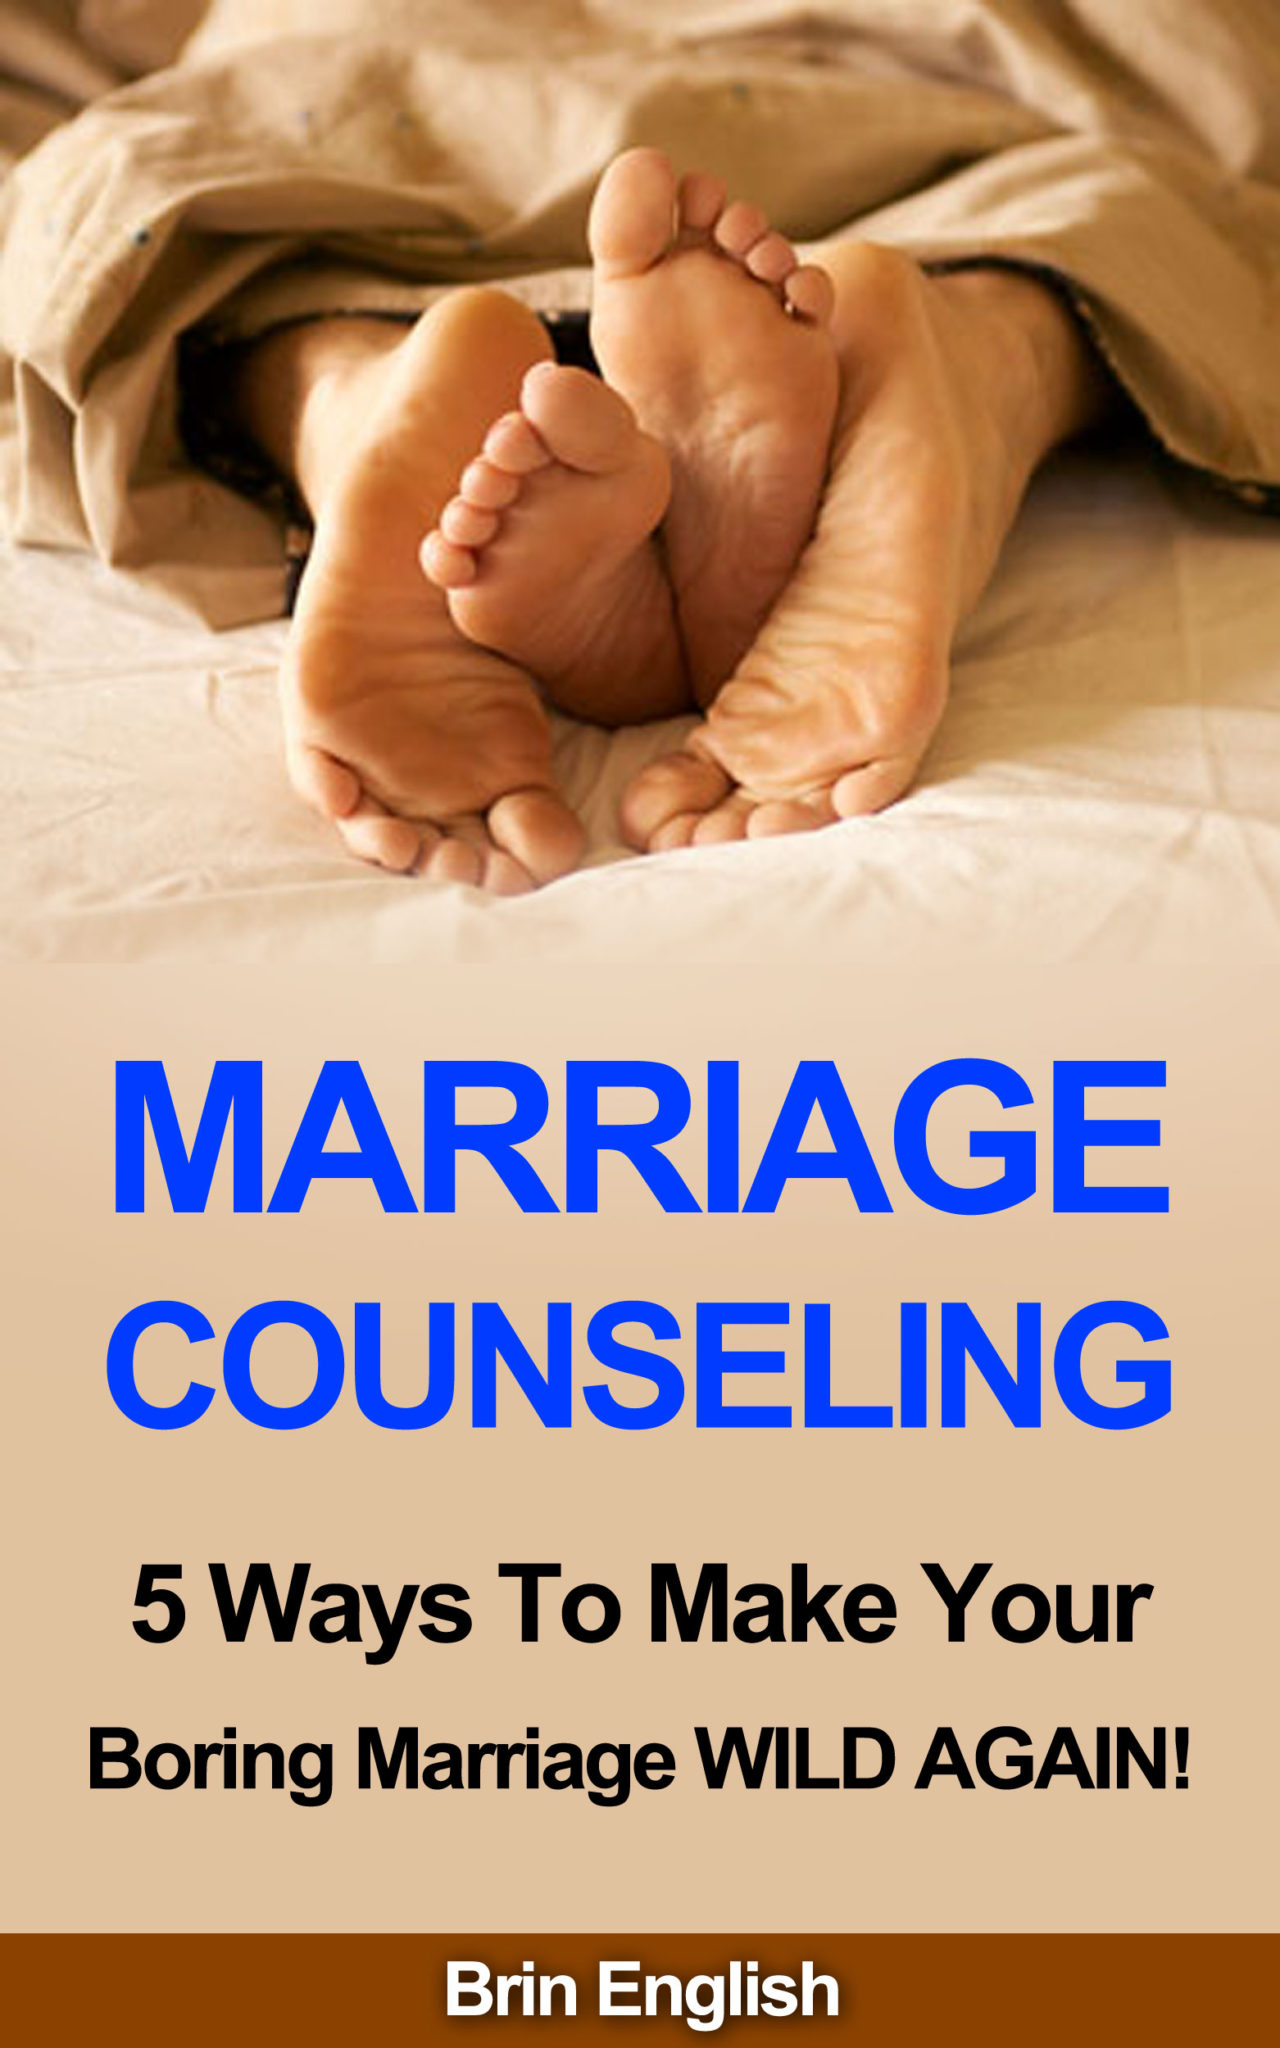 MARRIAGE COUNSELING: 5 Ways To Make Your Boring Marriage WILD AGAIN! by Brin English